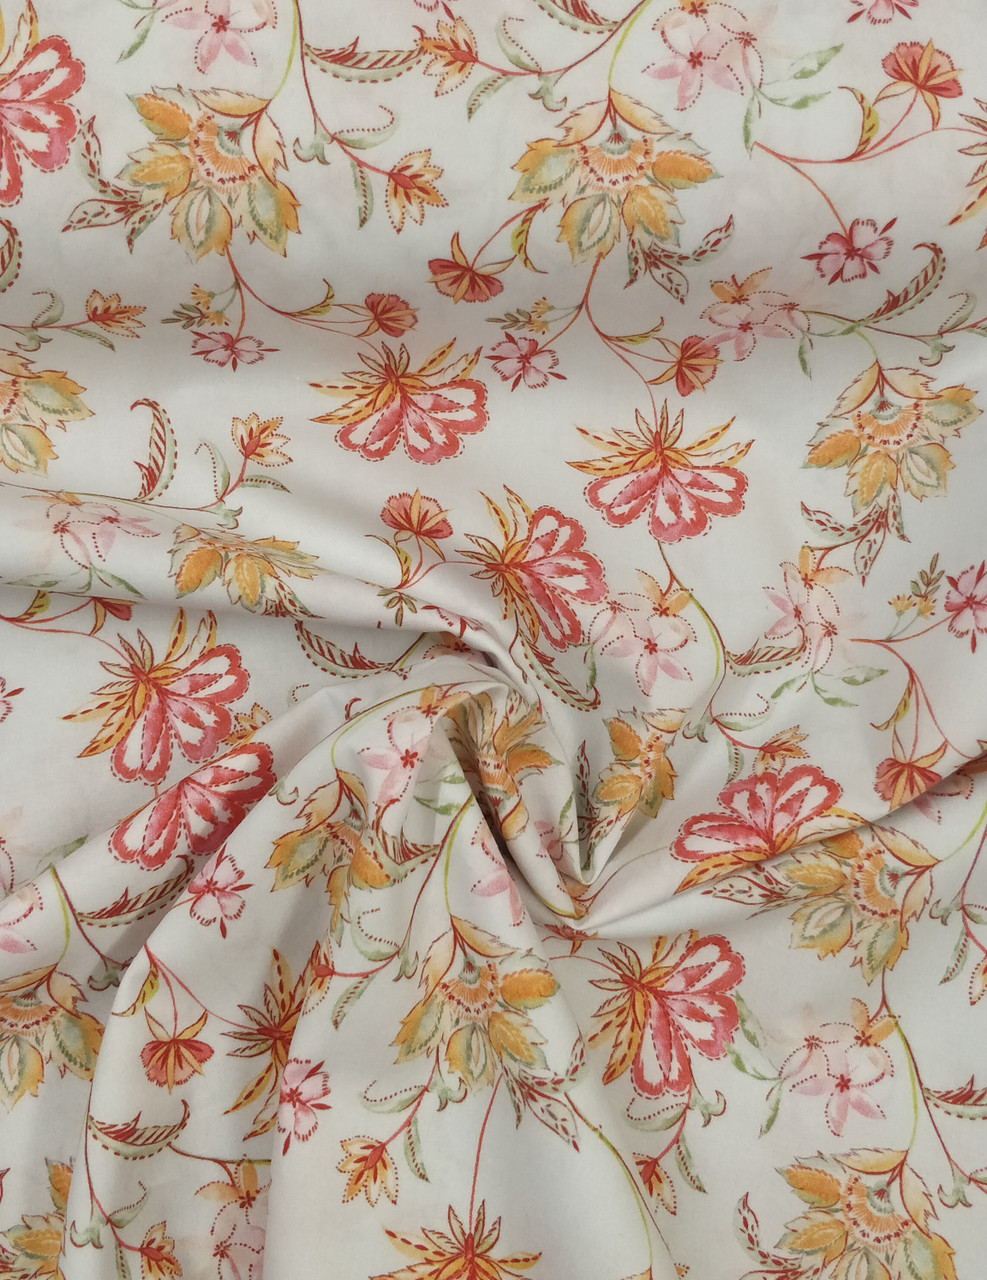 A lovely quality London Lawn, Pretty pink and orange flowers, Ideal for dresses, shirts and more, A crisp fabric that pleats well, 144 cm wide
Wash at 30 degrees, Priced per metre, 